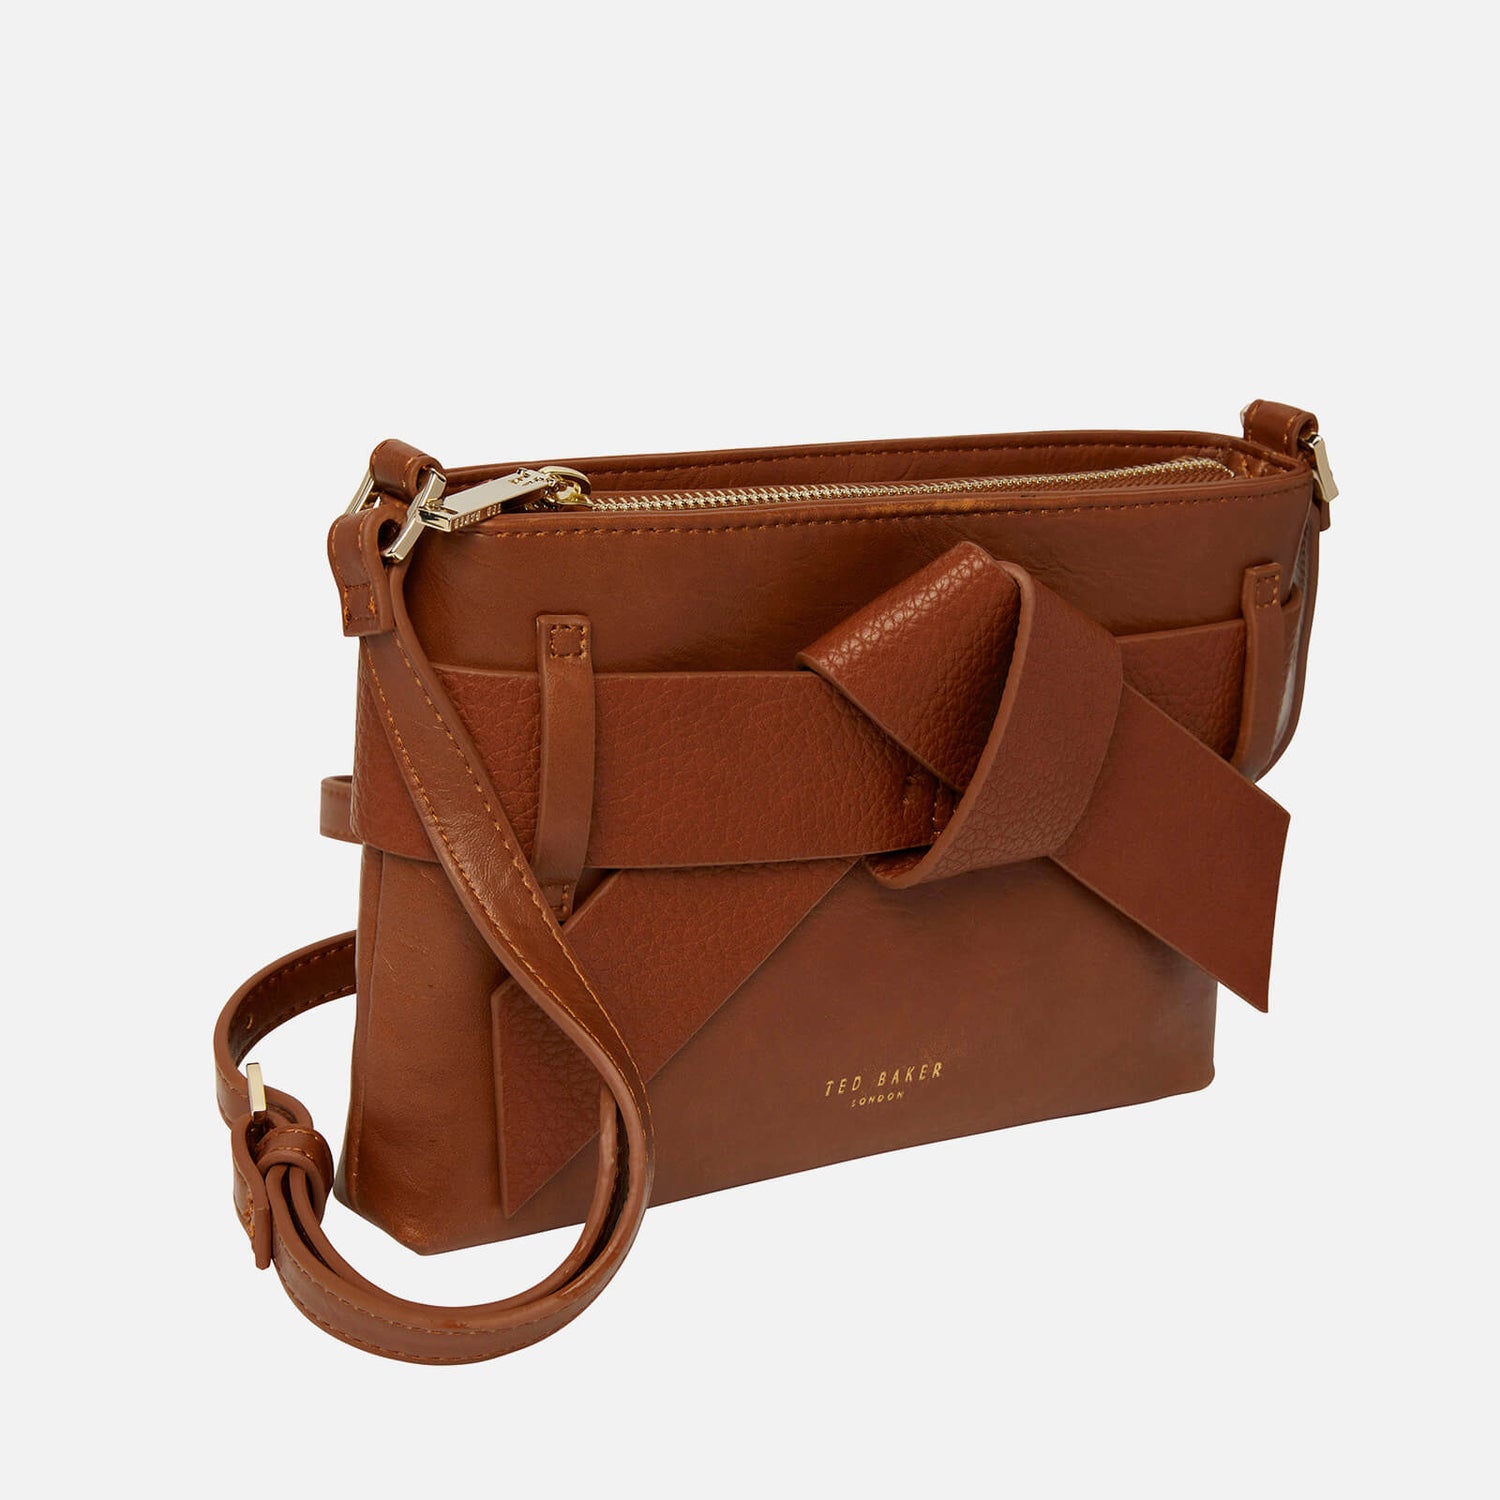 Ted Baker Jimsina Bow Faux Leather Cross-Body Bag